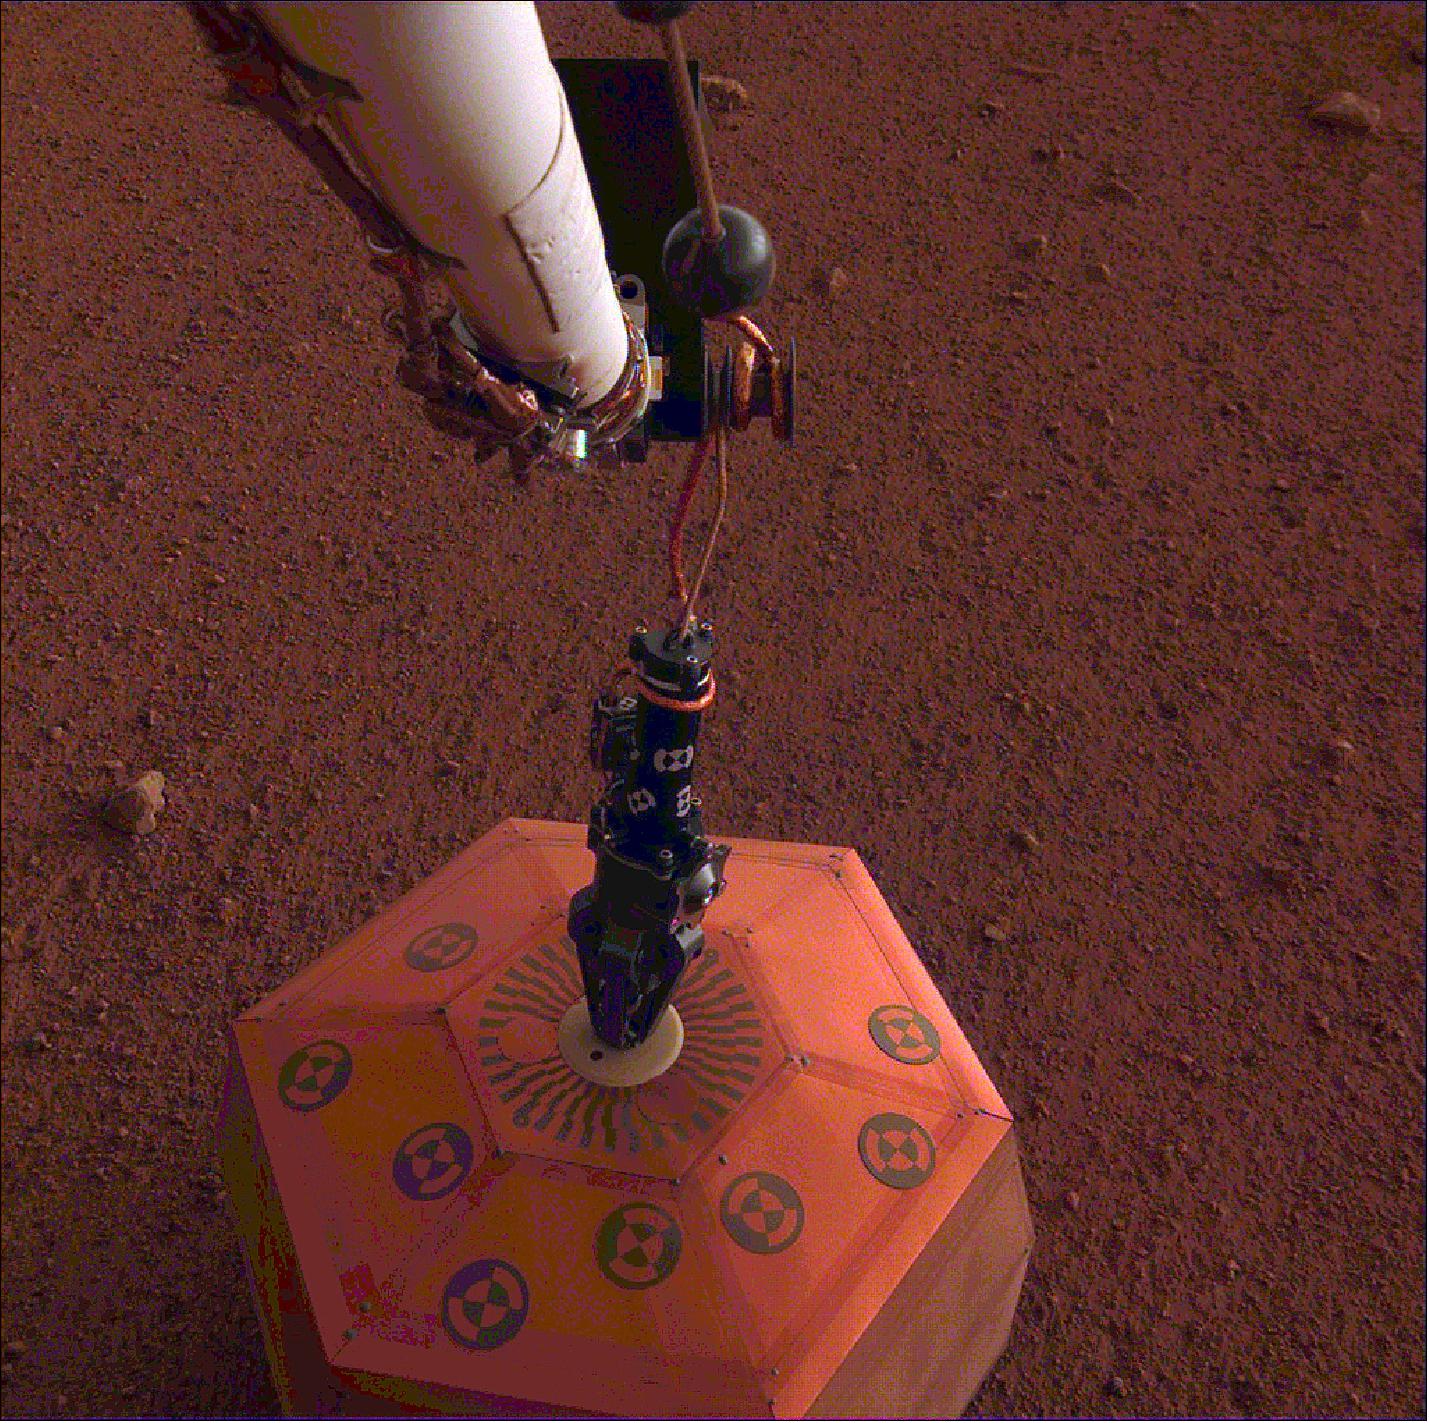 Figure 49: NASA's InSight lander placed its seismometer on Mars on Dec. 19, 2018. This was the first time a seismometer had ever been placed onto the surface of another planet (image credit: NASA/JPL-Caltech)